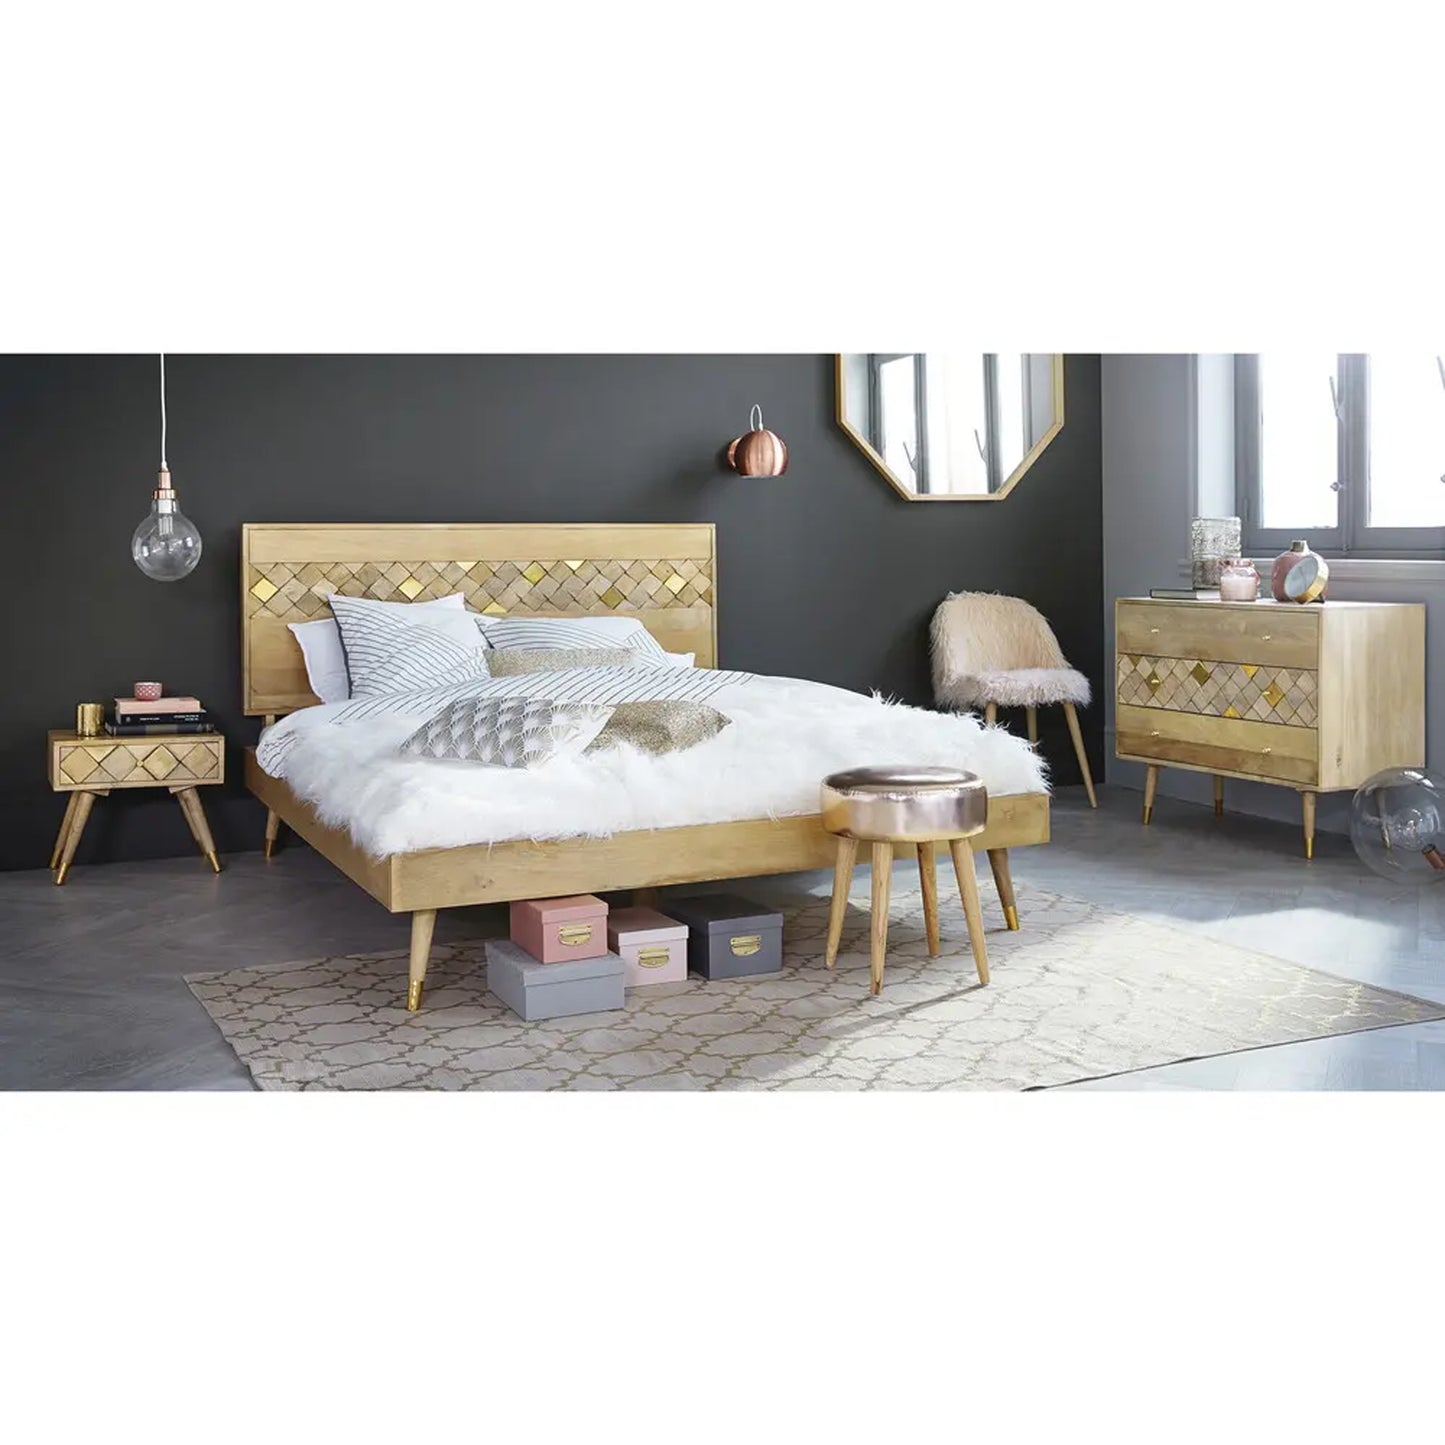 Alen Queen Without Storage Bed-Natural